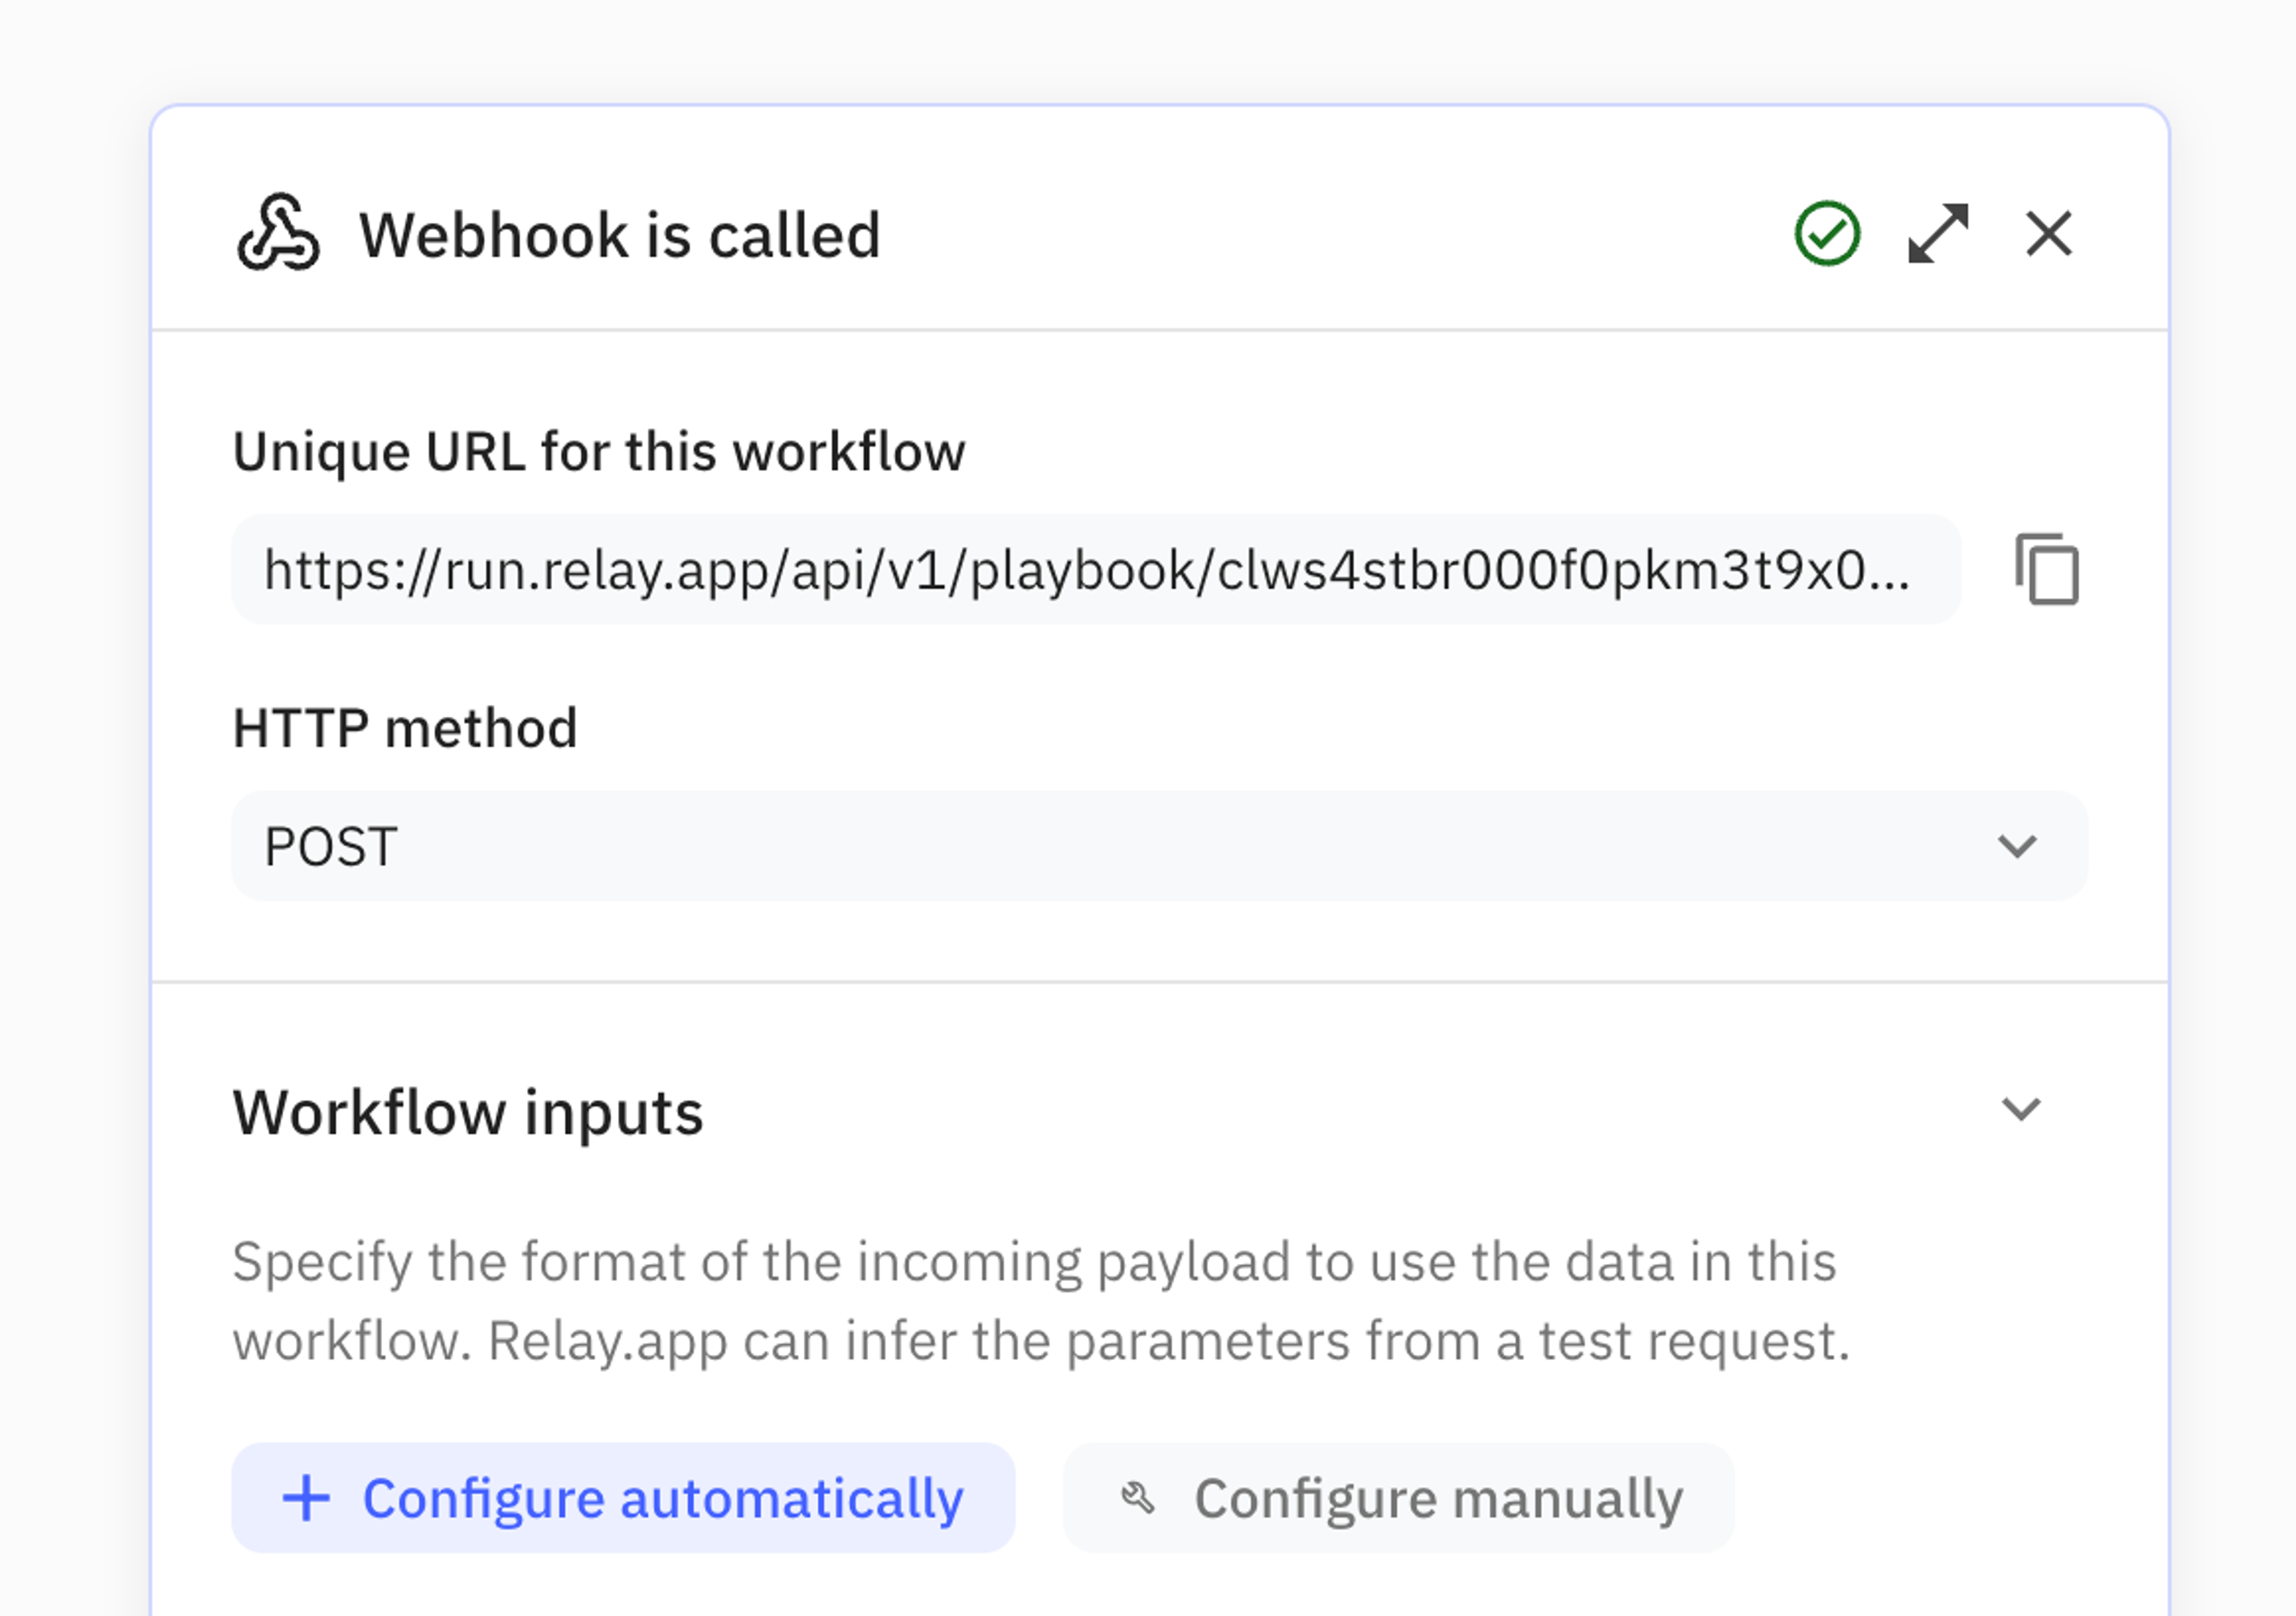 The aspects that make up the configuration of a Webhook Trigger are (1) its unique URL, (2) the chosen HTTP request method, and (3) the specification of the workflow inputs